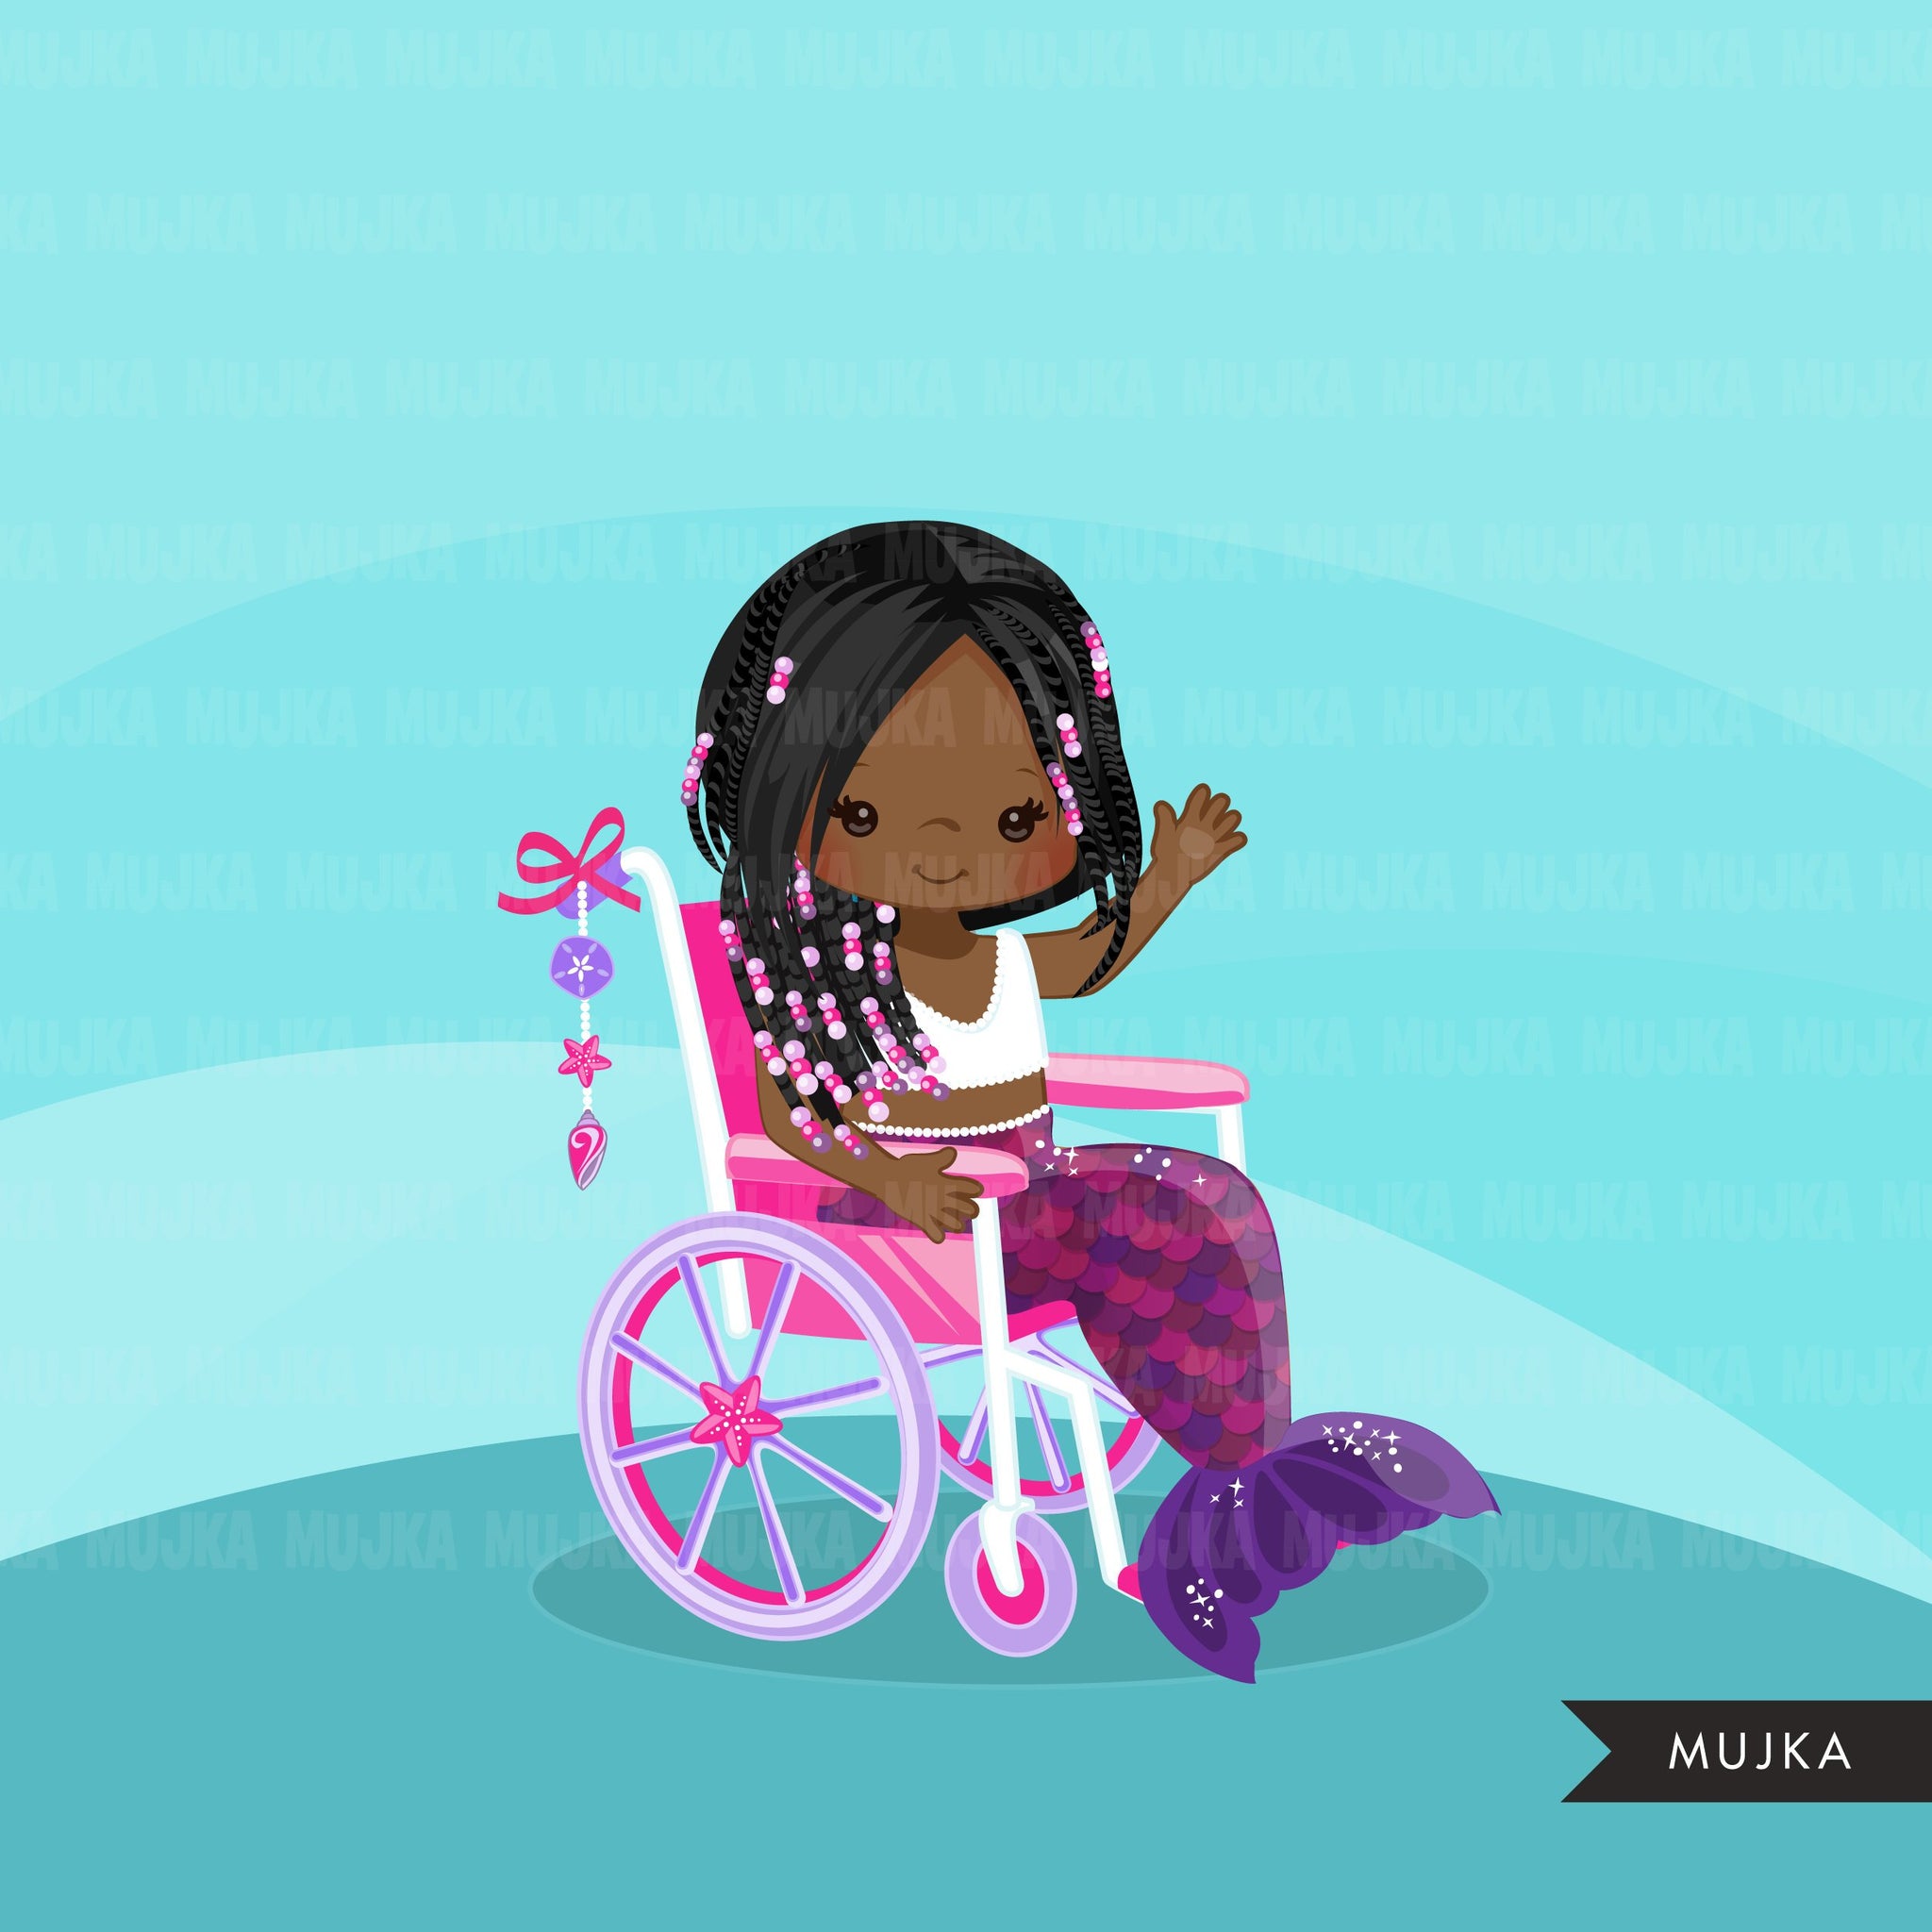 Special Needs Wheelchair clipart, black Mermaid princess girl with disability